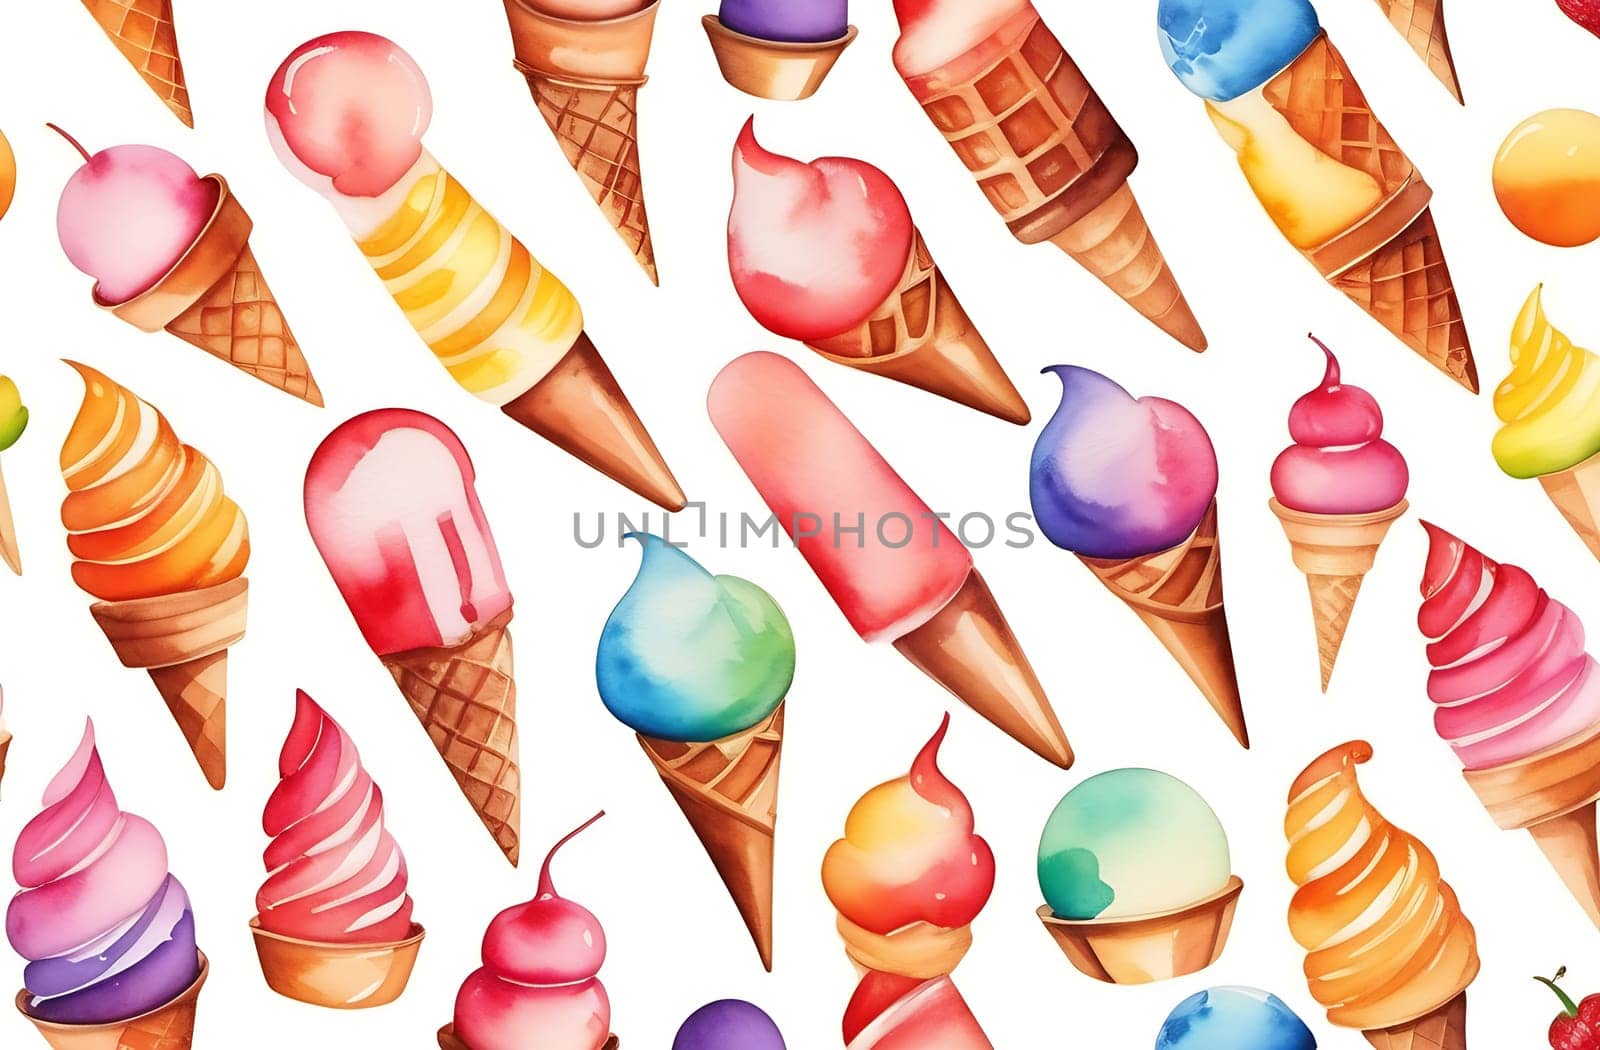 A set of different ice cream balls in waffle cones, isolated on a white background, watercolor style by claire_lucia